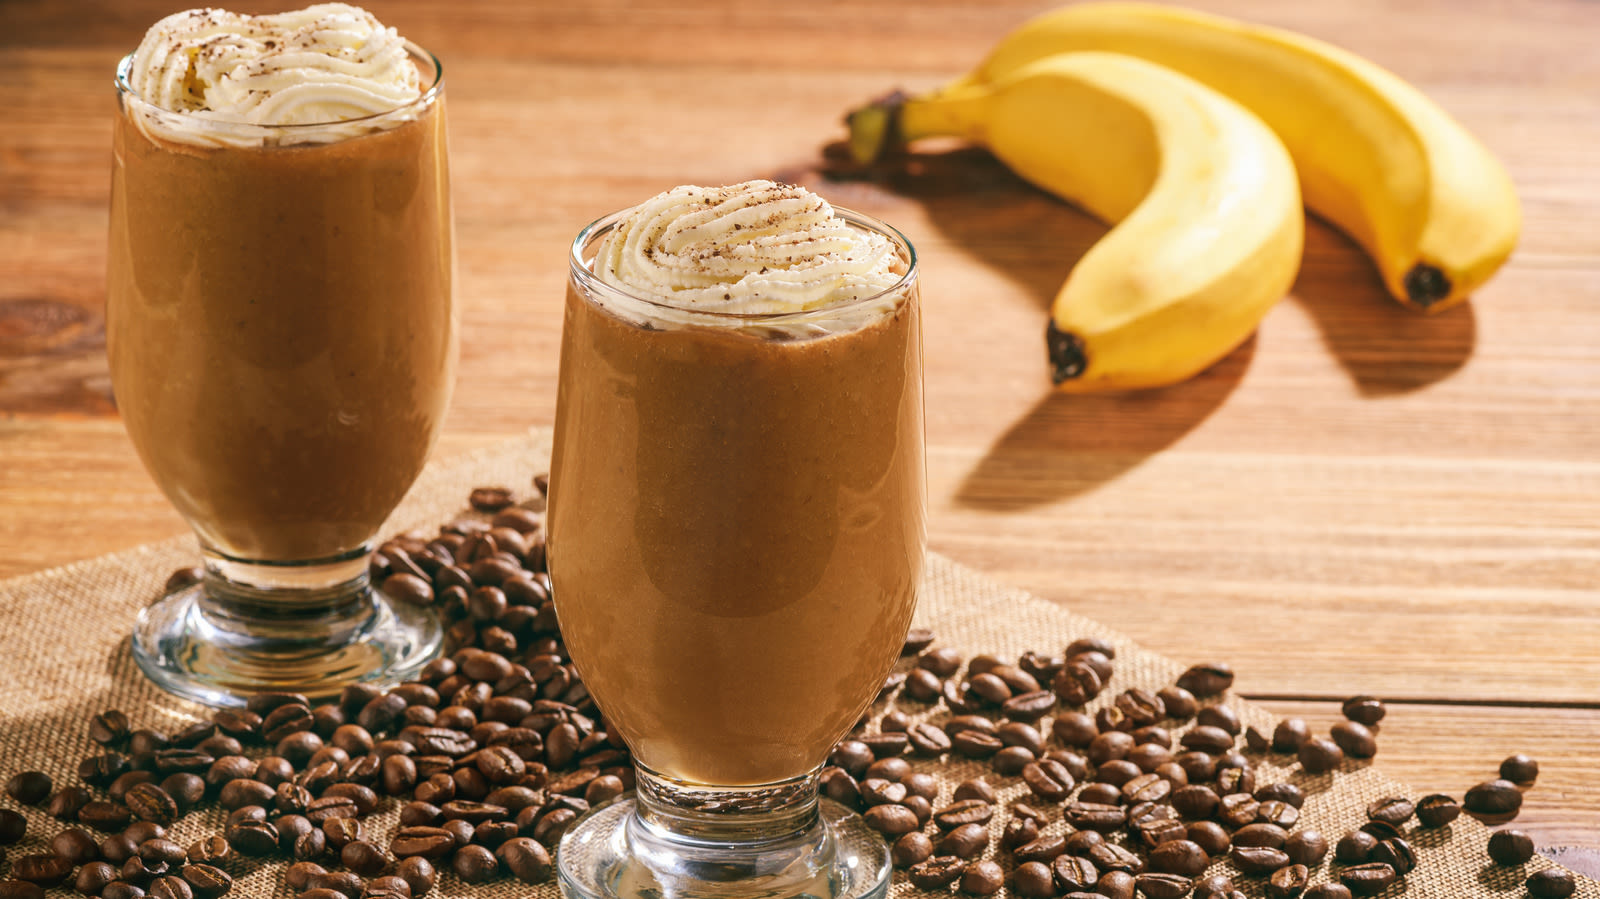 2-Ingredient Banana Cold Foam Is What Iced Coffee Dreams Are Made Of